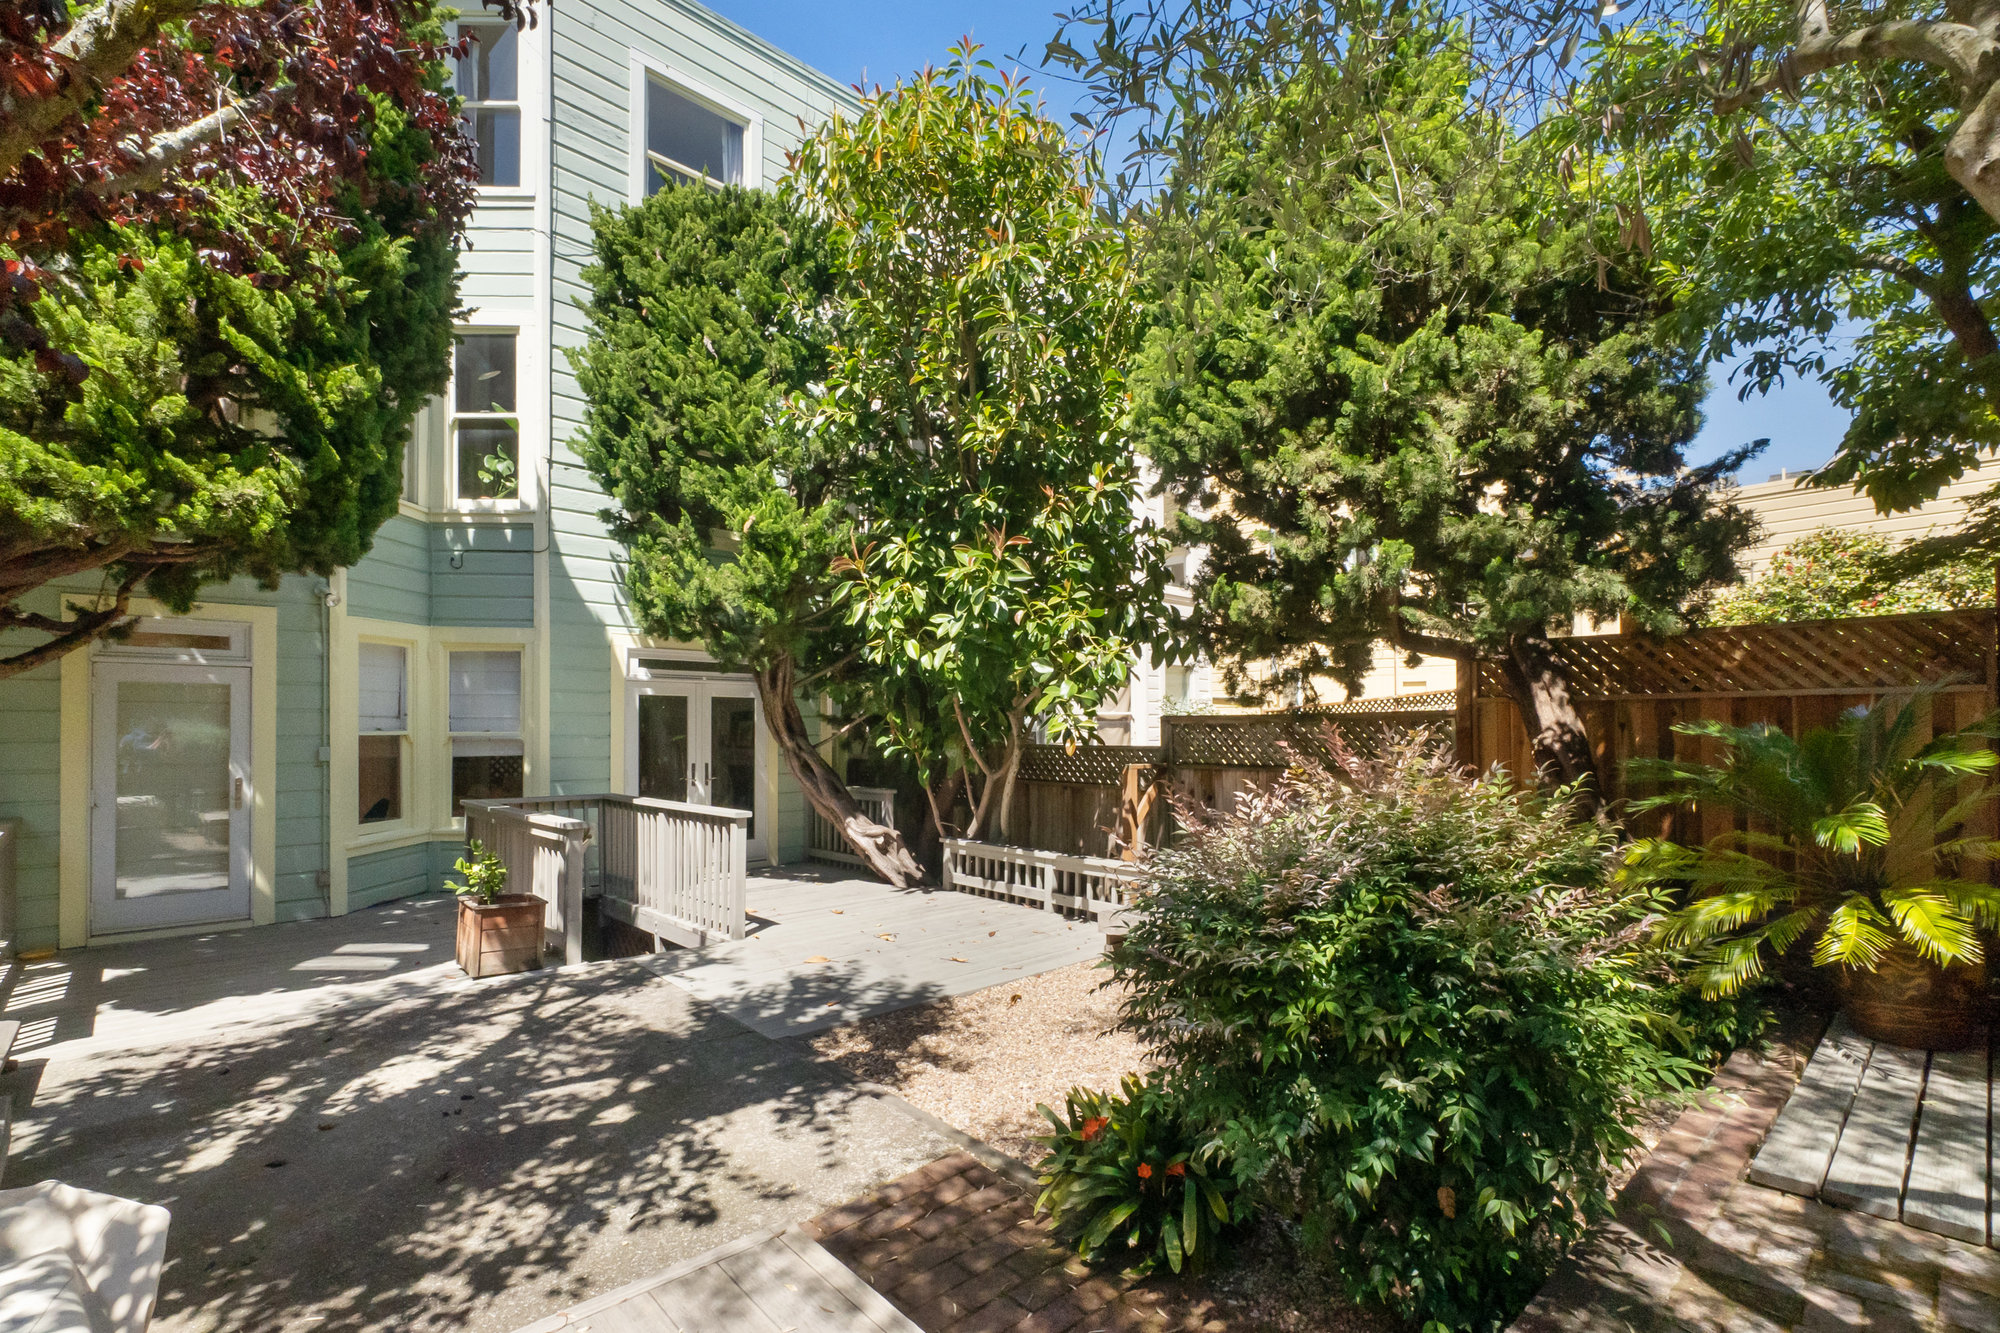 Property Photo: Rear view of 1473 Waller Street, as seen from the yard